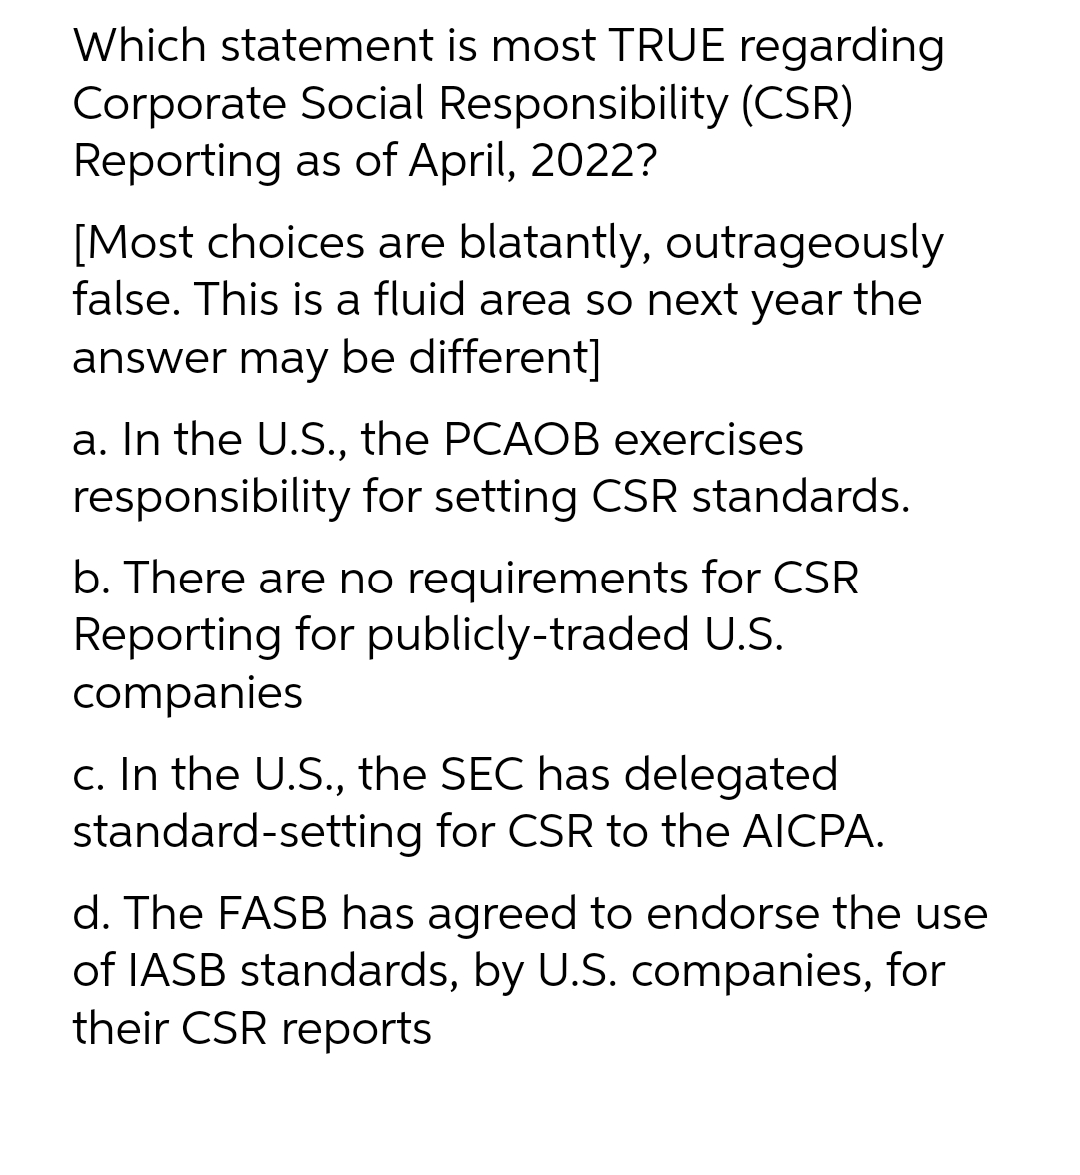 Which statement is most TRUE regarding
Corporate Social Responsibility (CSR)
Reporting as of April, 2022?
[Most choices are blatantly, outrageously
false. This is a fluid area so next year the
answer may be different]
a. In the U.S., the PCAOB exercises
responsibility for setting CSR standards.
b. There are no requirements for CSR
Reporting for publicly-traded U.S.
companies
c. In the U.S., the SEC has delegated
standard-setting for CSR to the AICPA.
d. The FASB has agreed to endorse the use
of IASB standards, by U.S. companies, for
their CSR reports